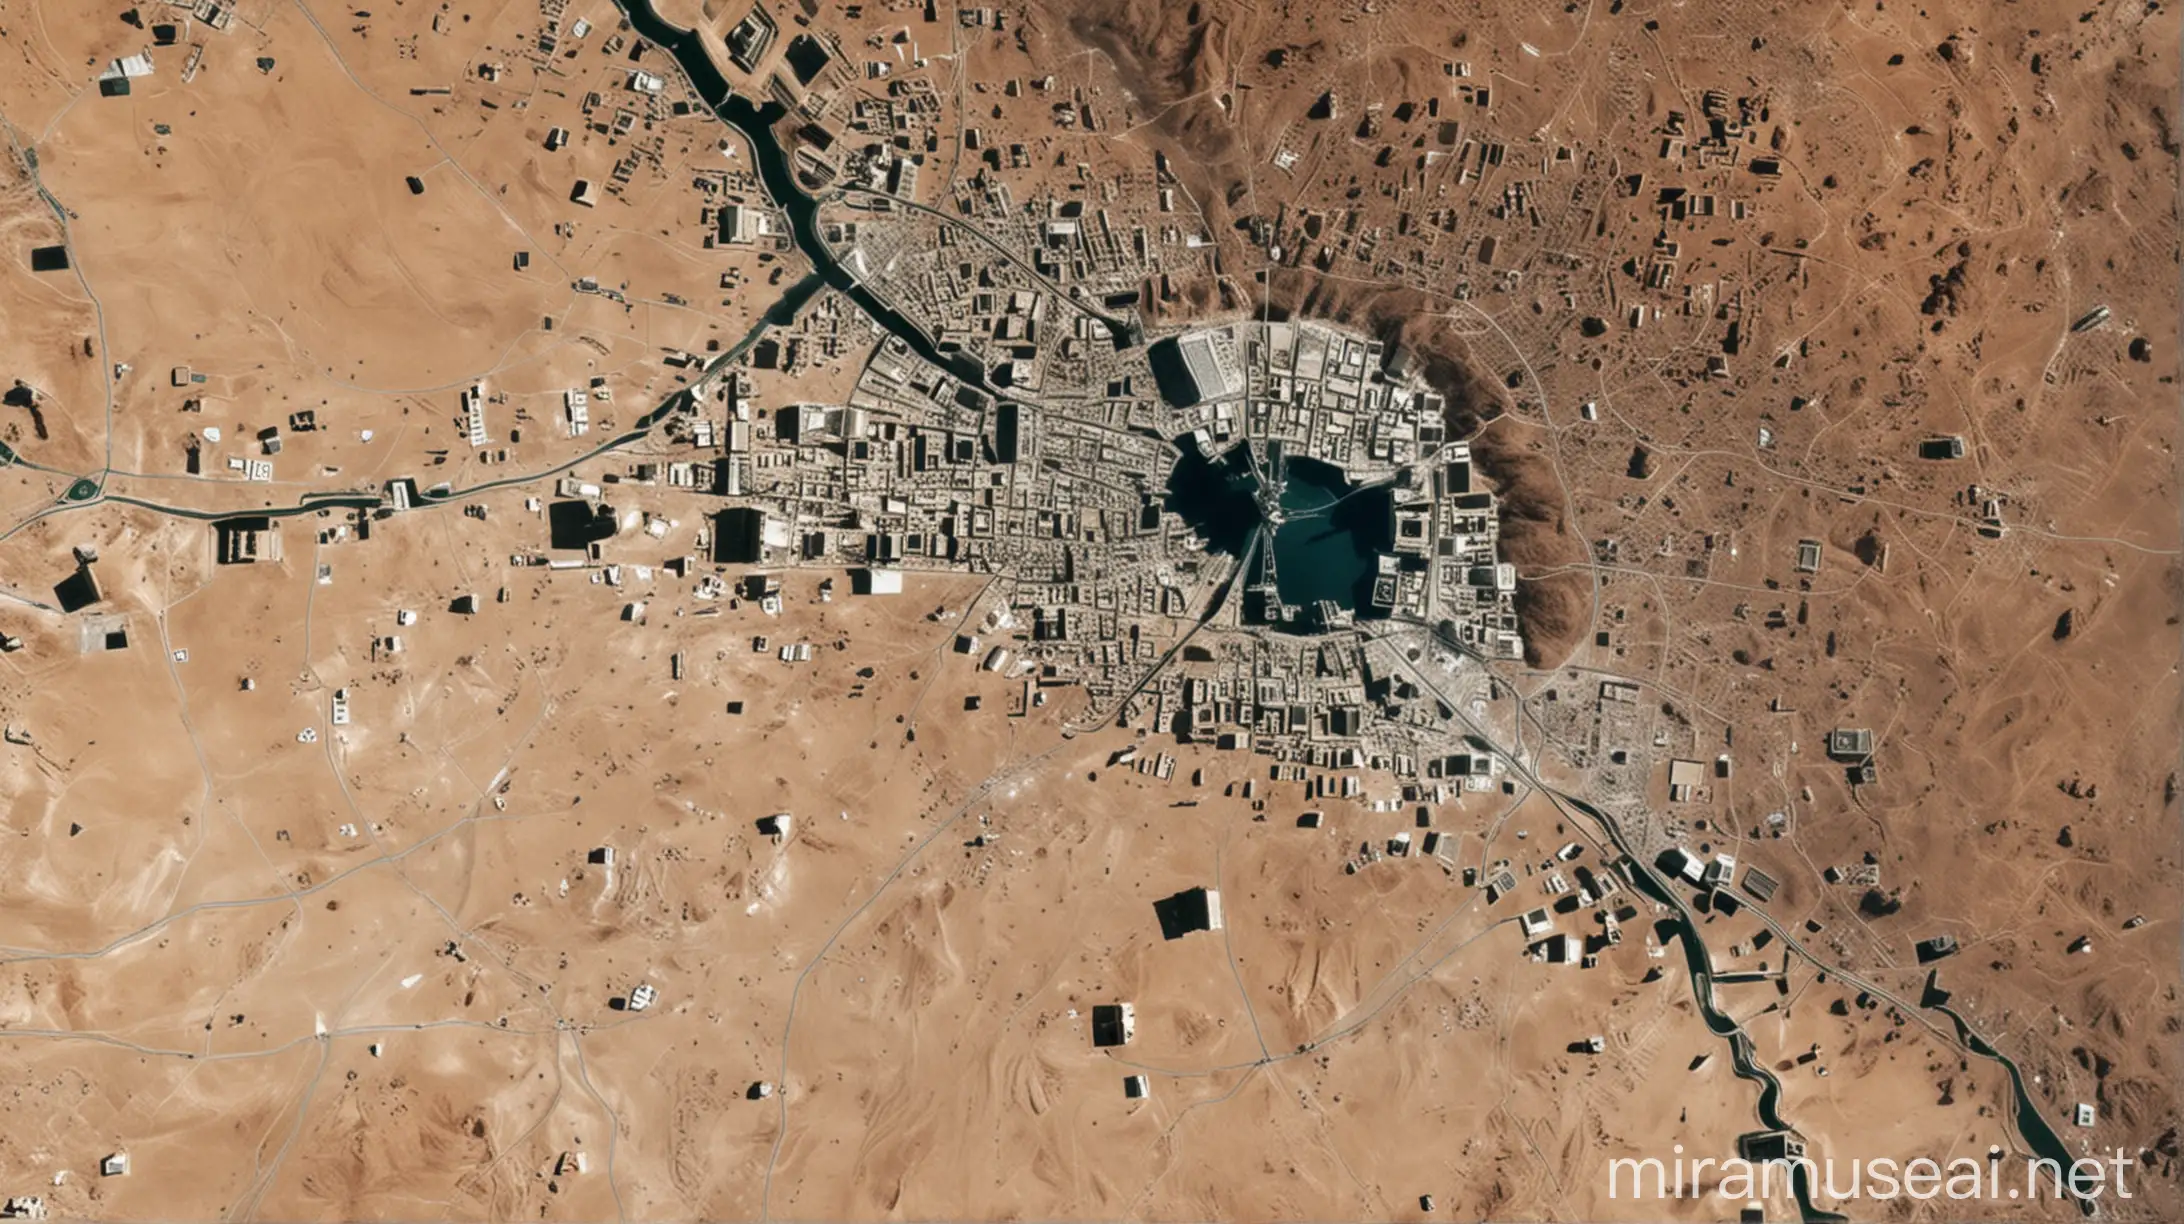 NASA's Satellite View of Earth with Kaaba Highlighted:
An image showing a satellite view of Earth with a distinct highlight on the location of the Kaaba in Mecca, radiating energy.

